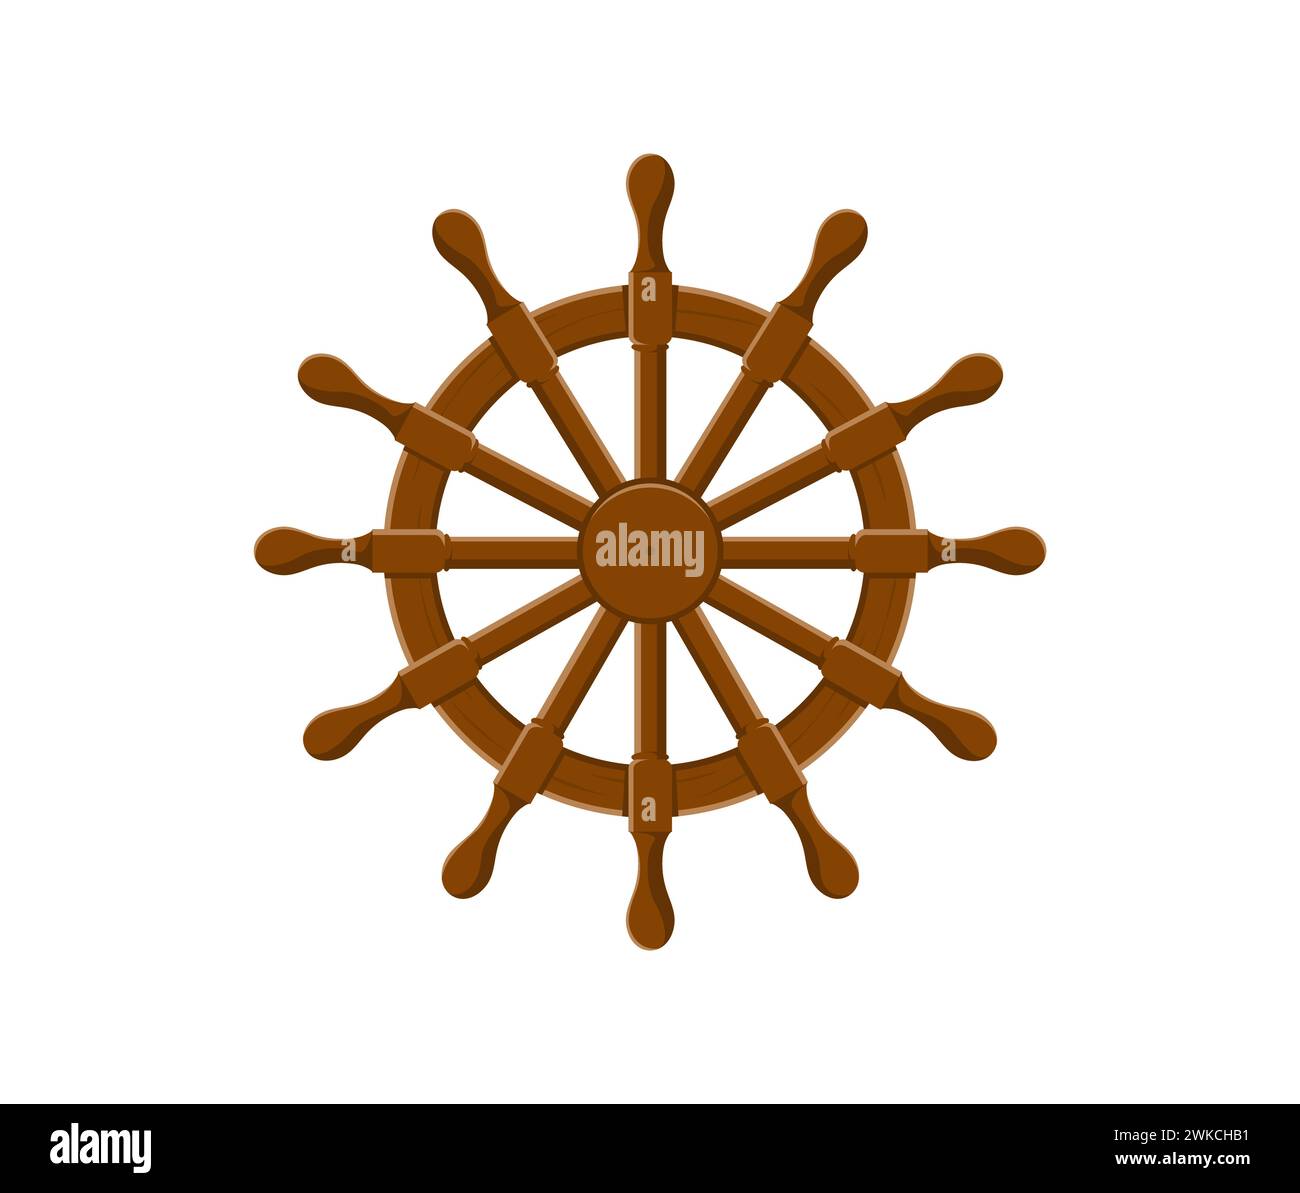 Cartoon ship steering wheel. Isolated vector wooden boat helm with polished spokes, vintage, circular nautical rudder, commands the vessel course. Game asset, maritime sailing item Stock Vector